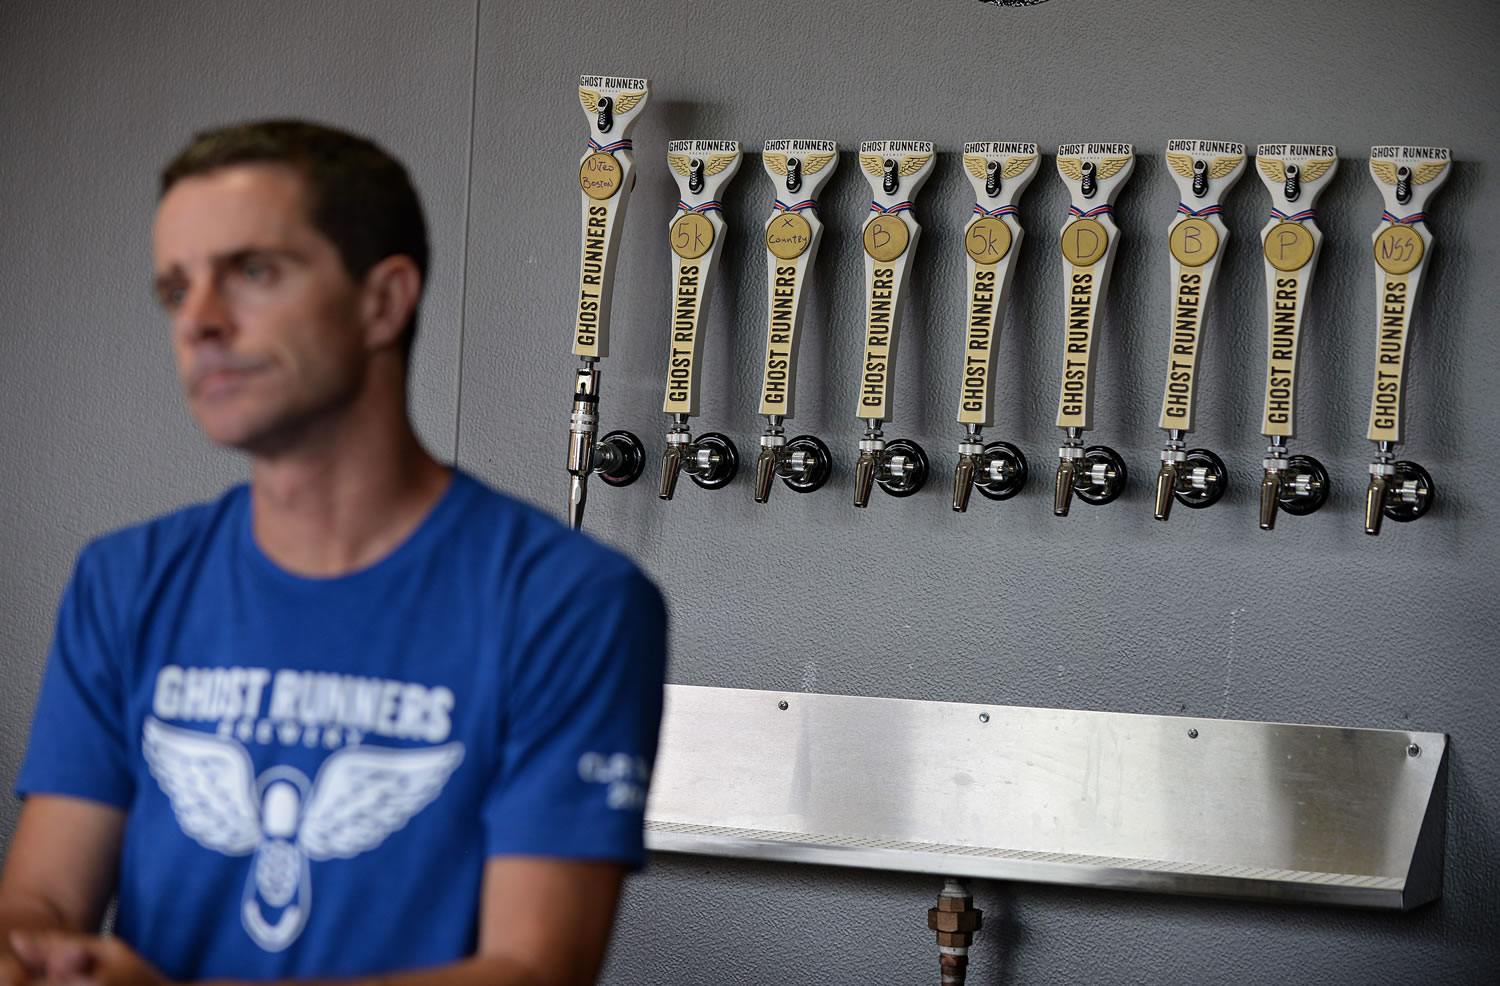 Co-owner Rob Ziebell offers a range of beers, all with running-related names, at Ghost Runners Brewery.